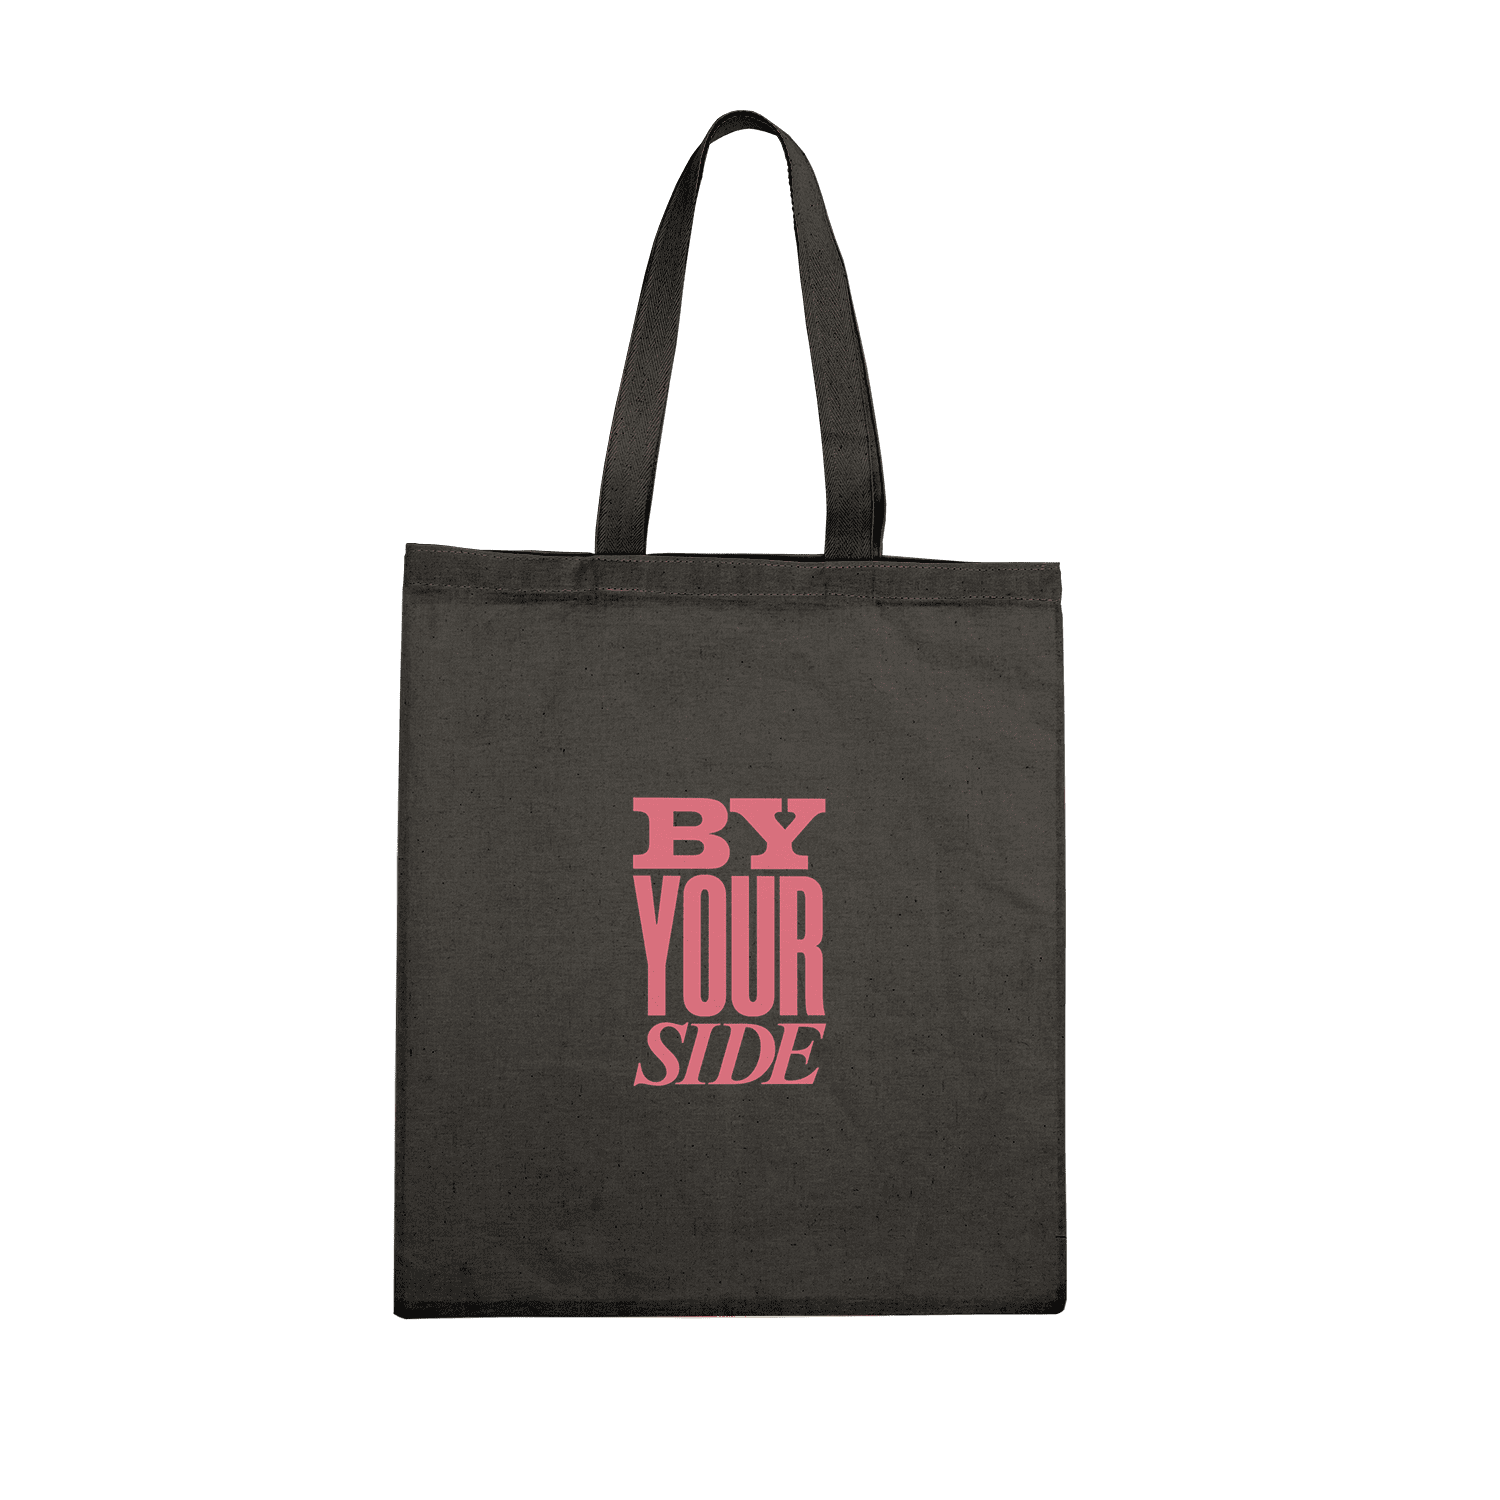 TOTE BAG - BY YOUR SIDE